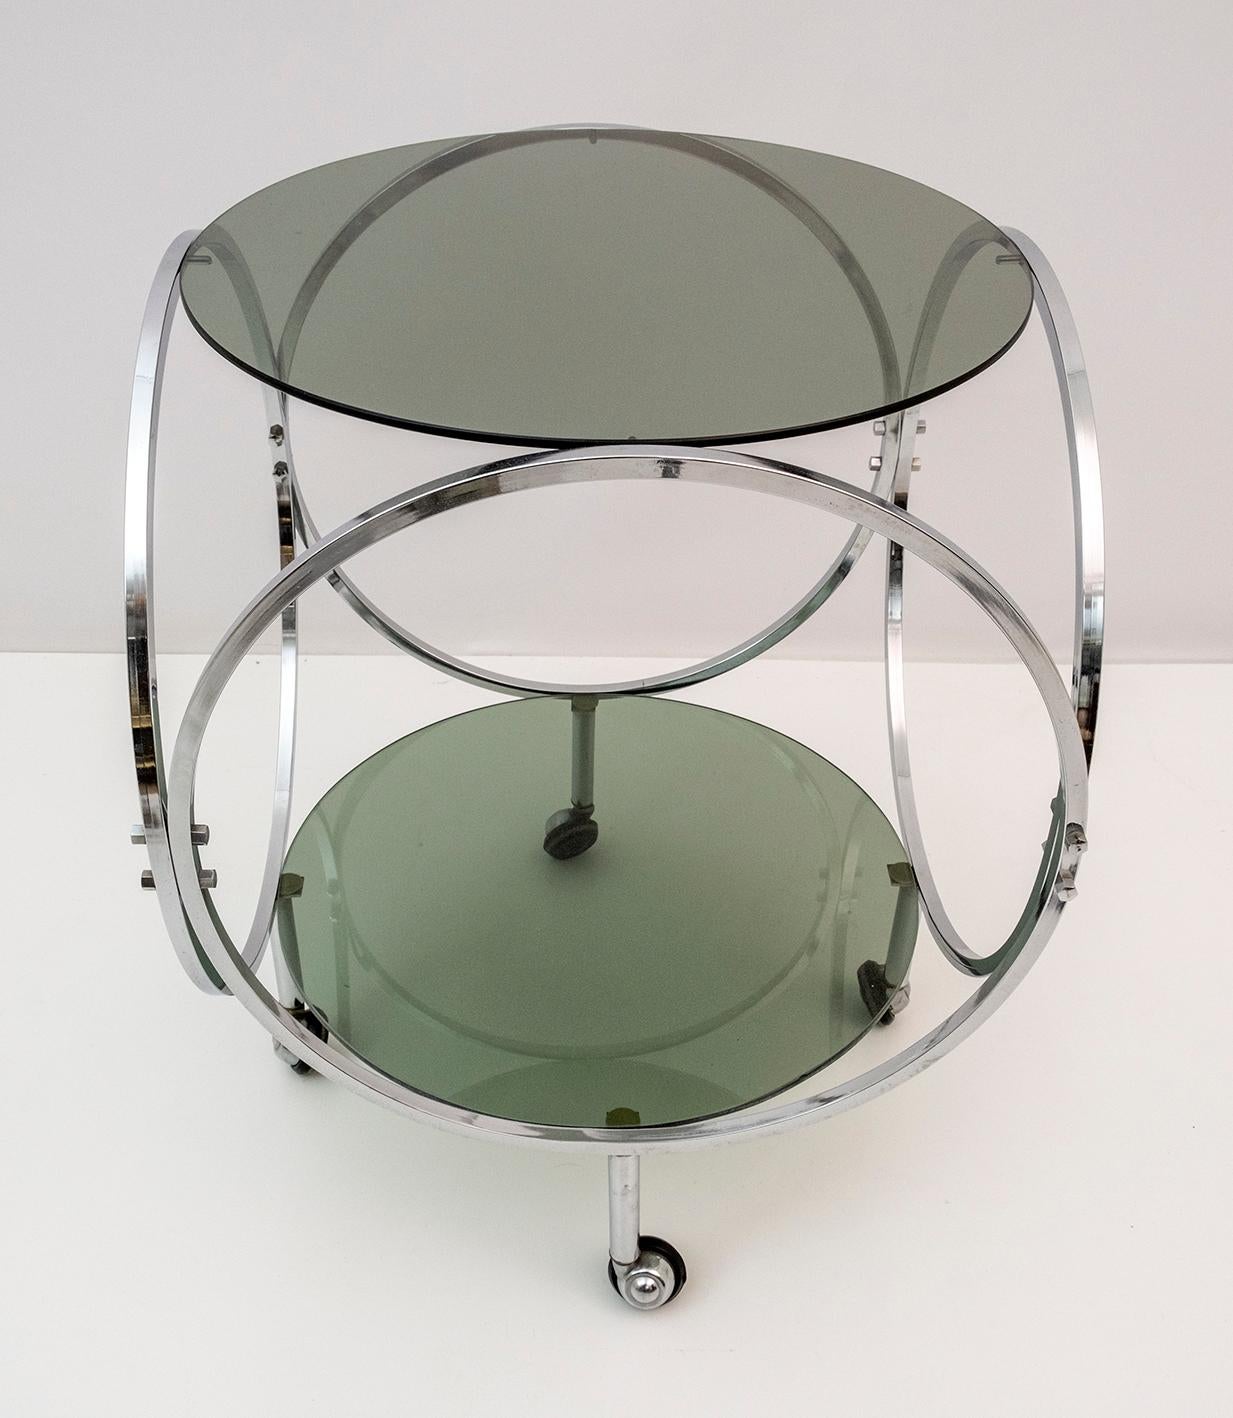 Space Age vintage coffee table in chromed metal and smoked glass from the 70s.
While the chromed metal base displays a beautiful curved construction, the smoked glass tops feature a round shape.